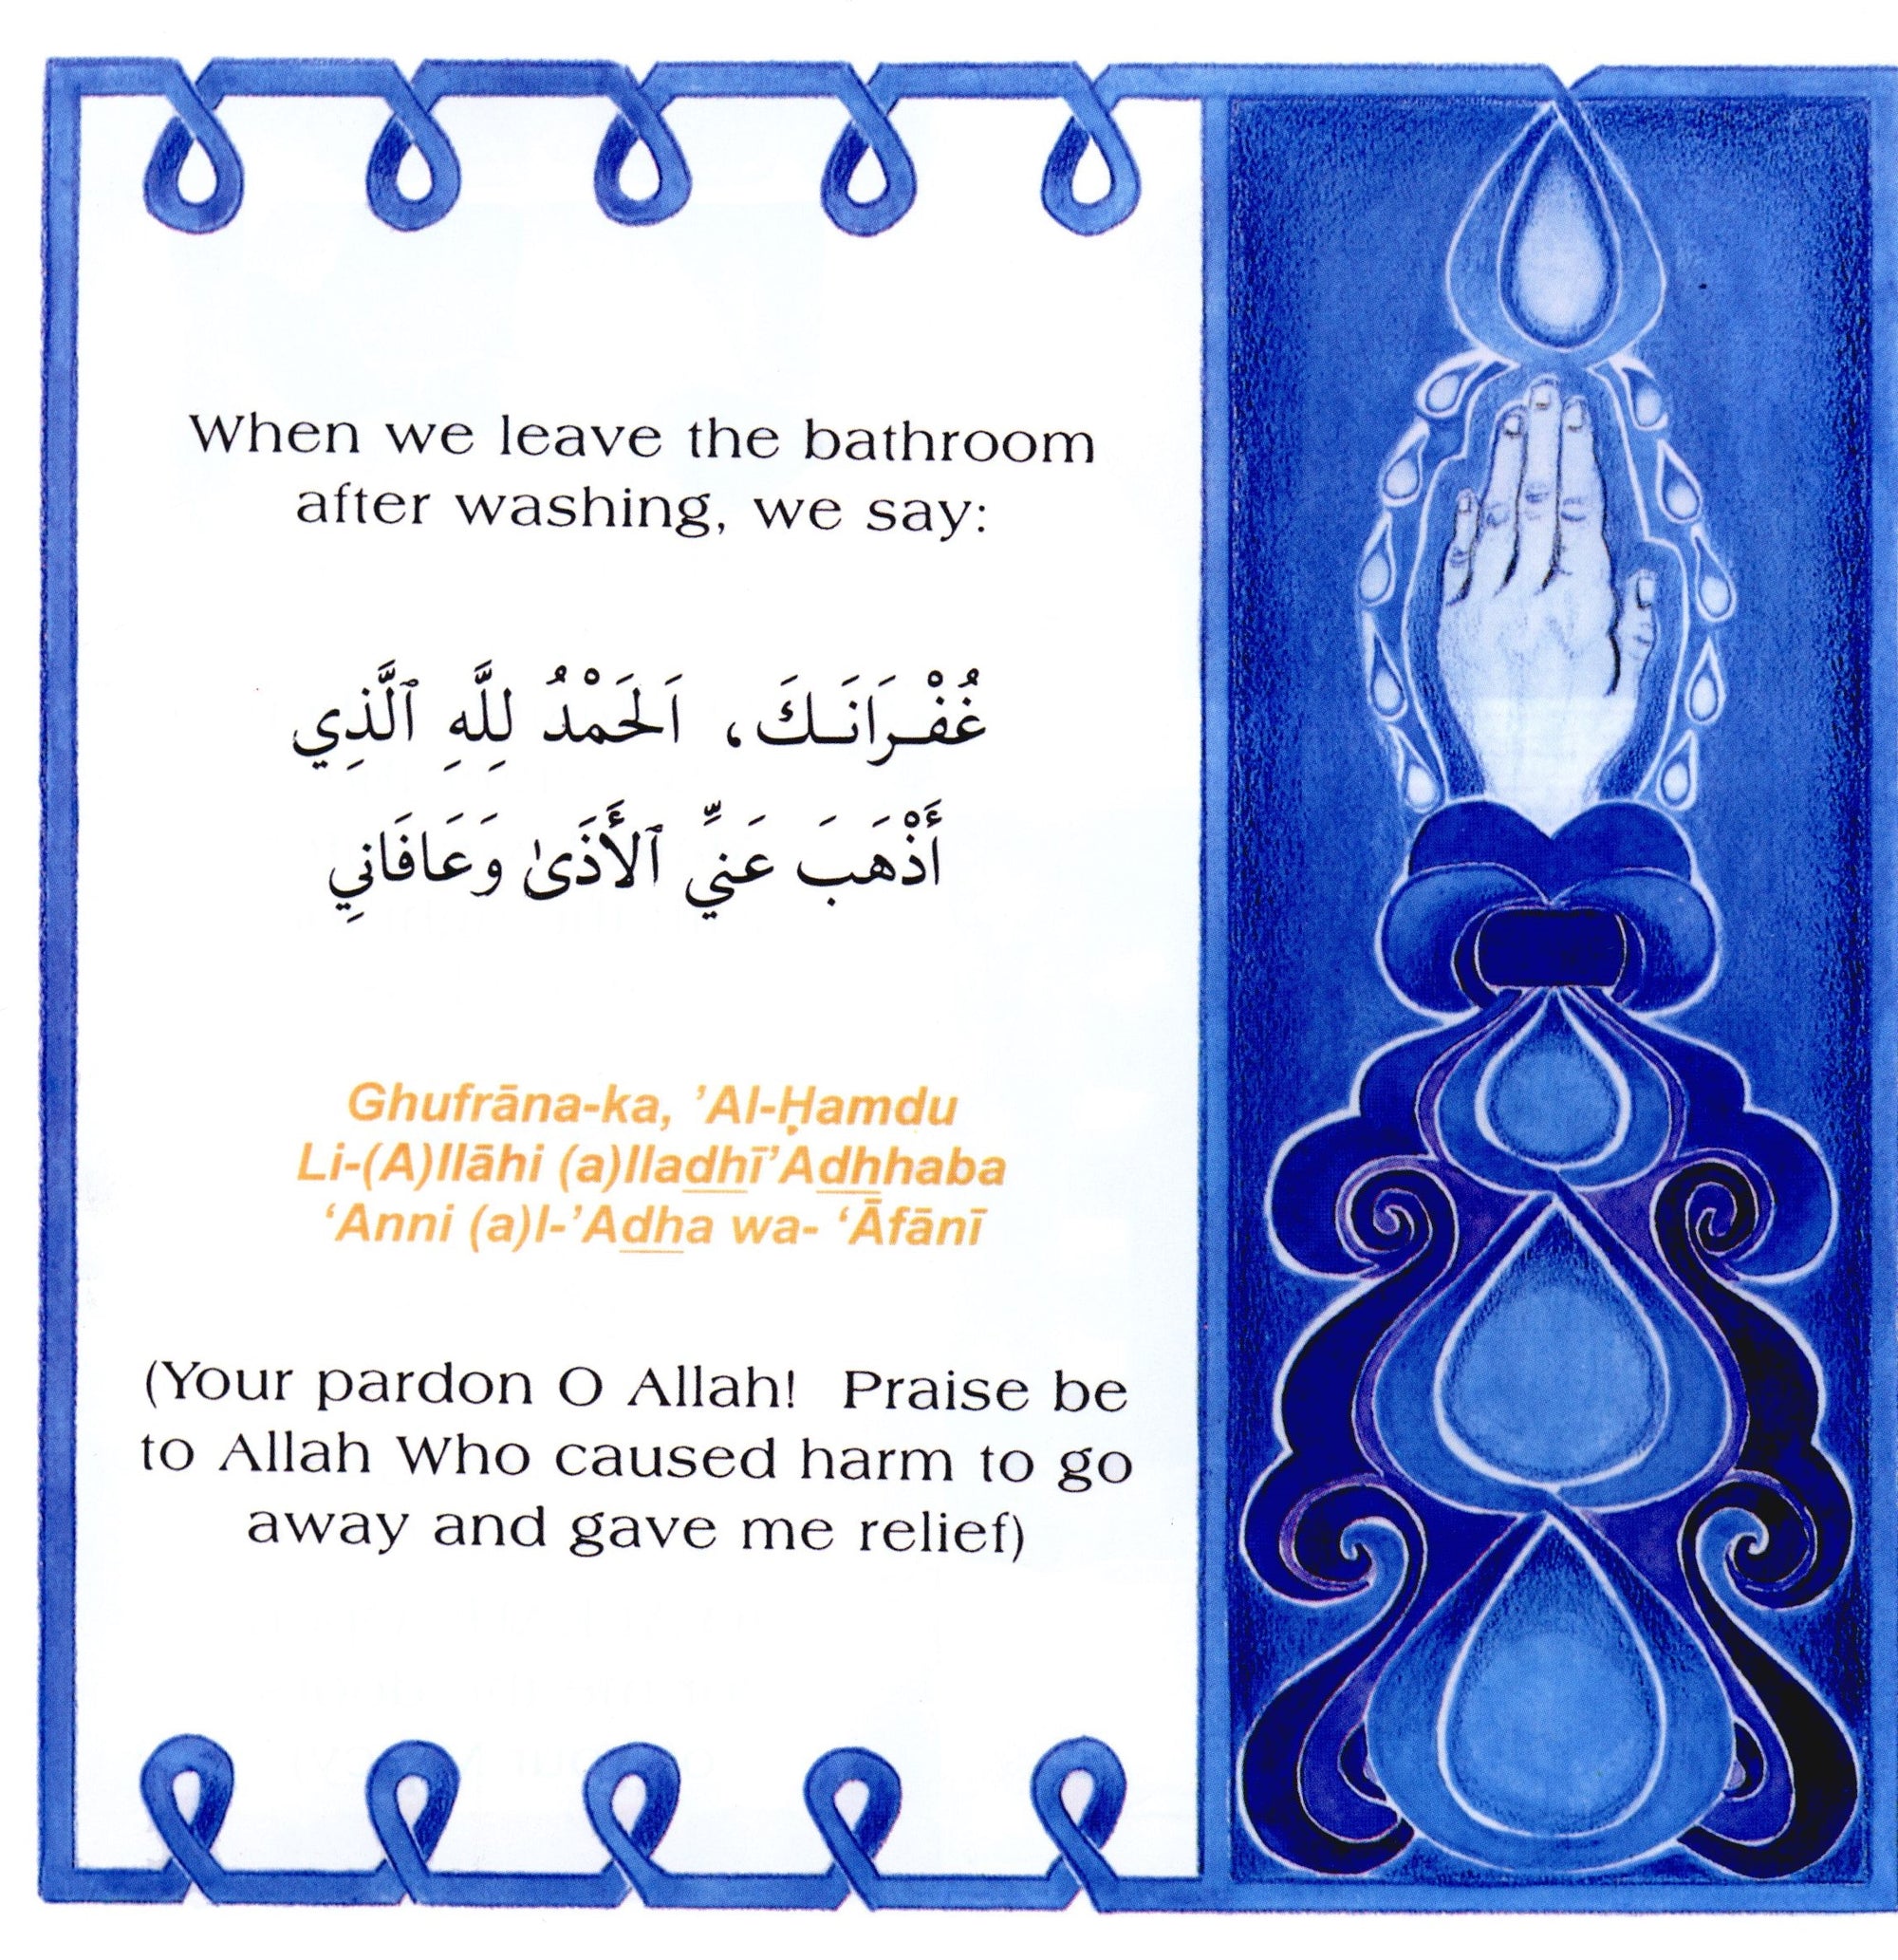 Our Book of Dua' for Children